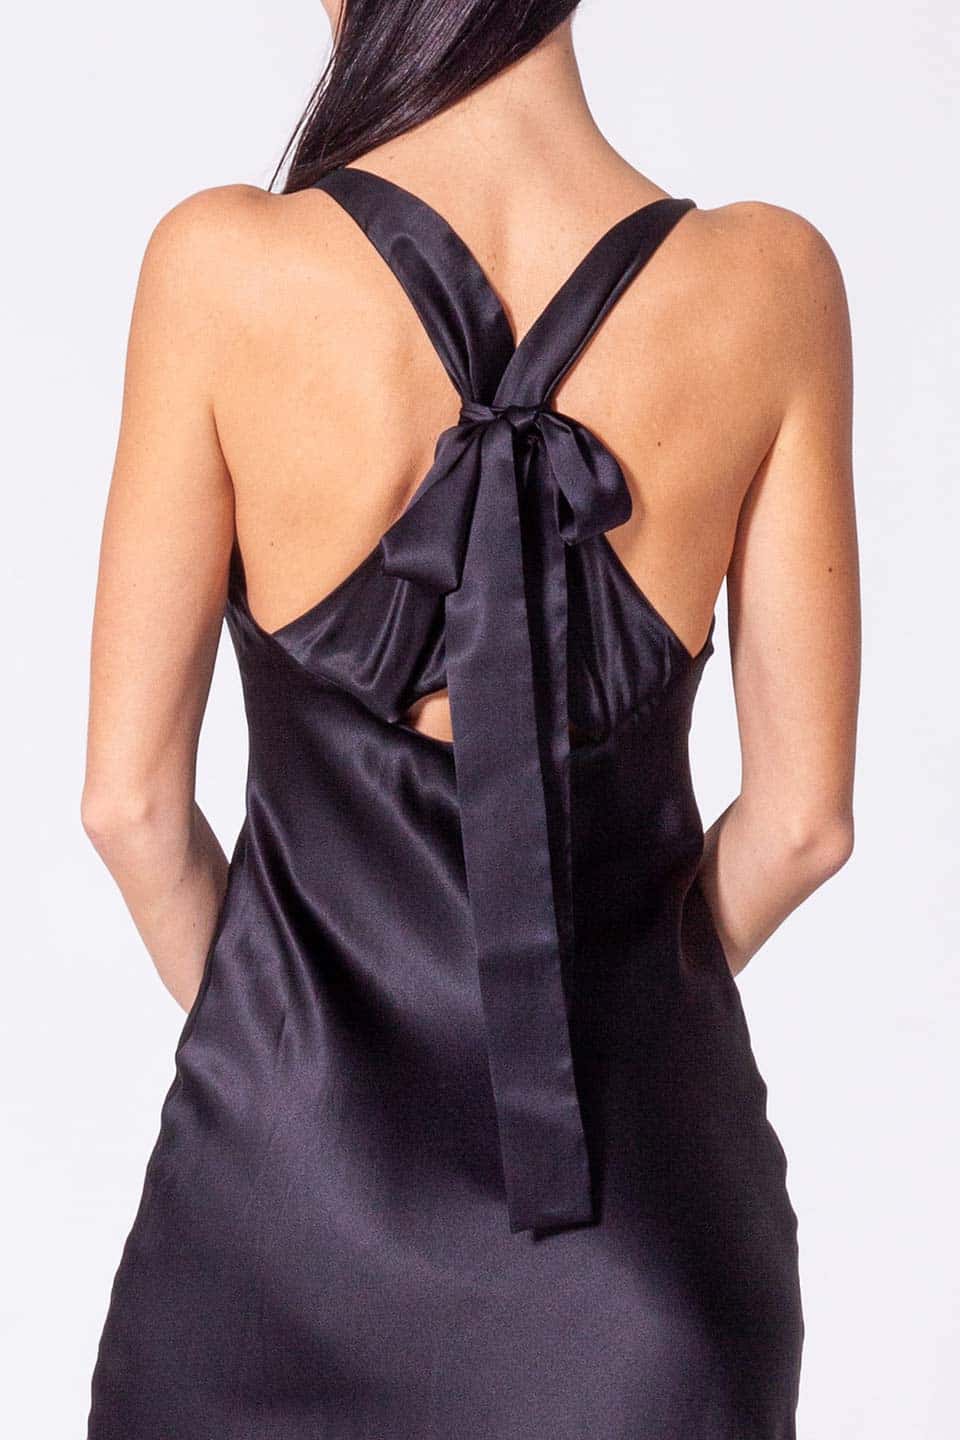 Thumbnail for Product gallery 5, Violante nessi calder dress black